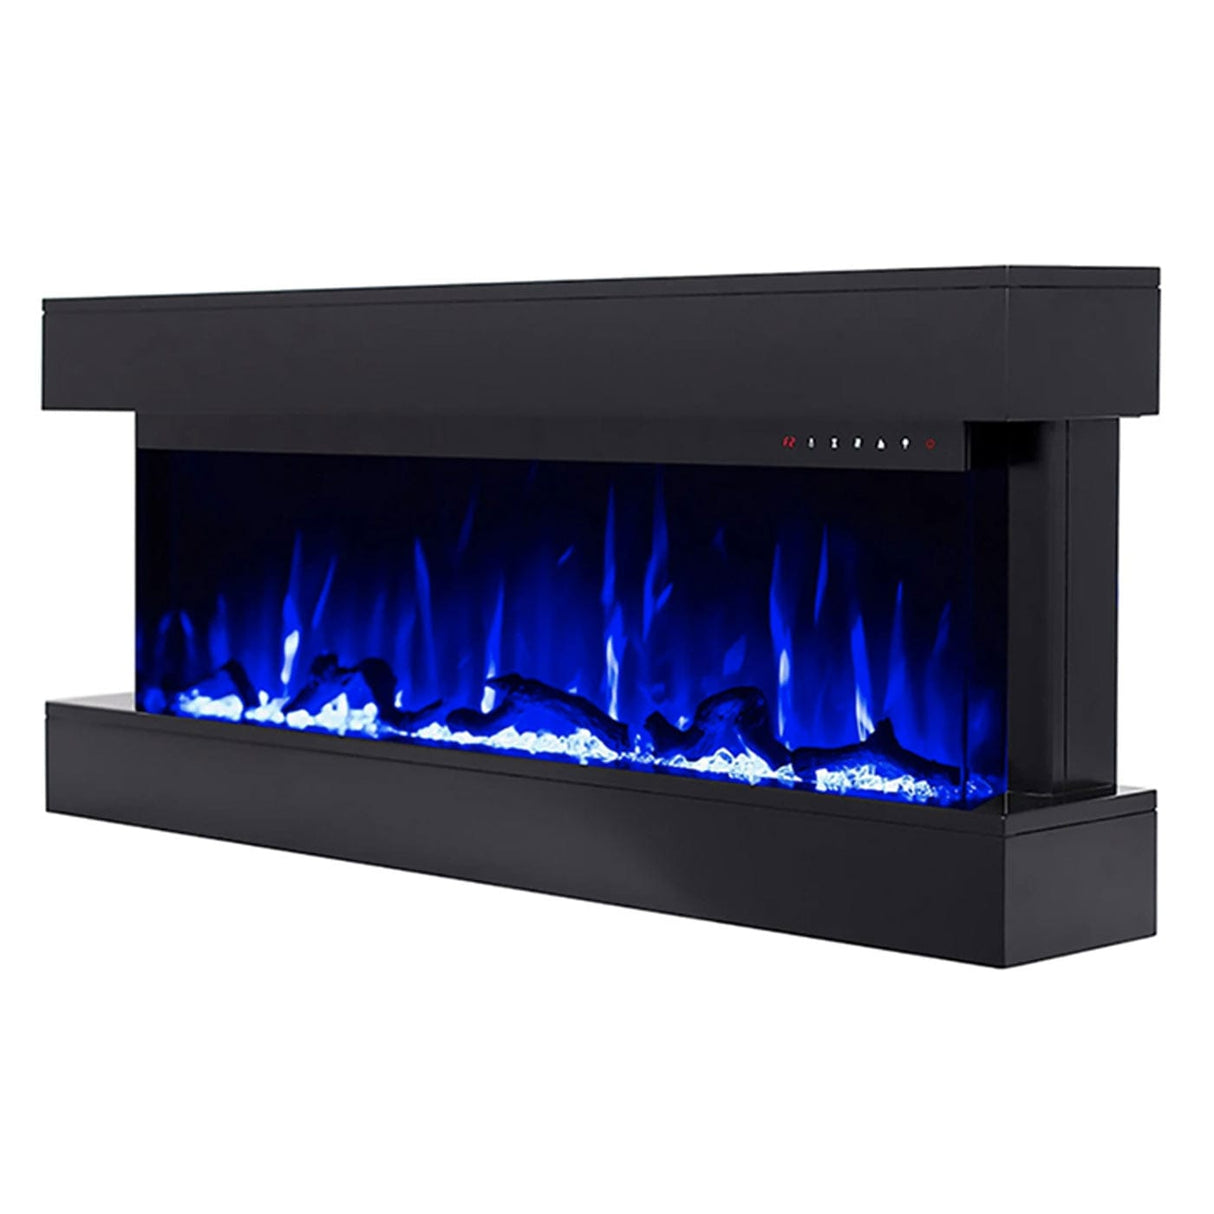 Touchstone Chesmont Black 50" 80034 Wall Mount 3-Sided Smart Electric Fireplace (Alexa/Google Compatible) - TS-80034 - Avanquil